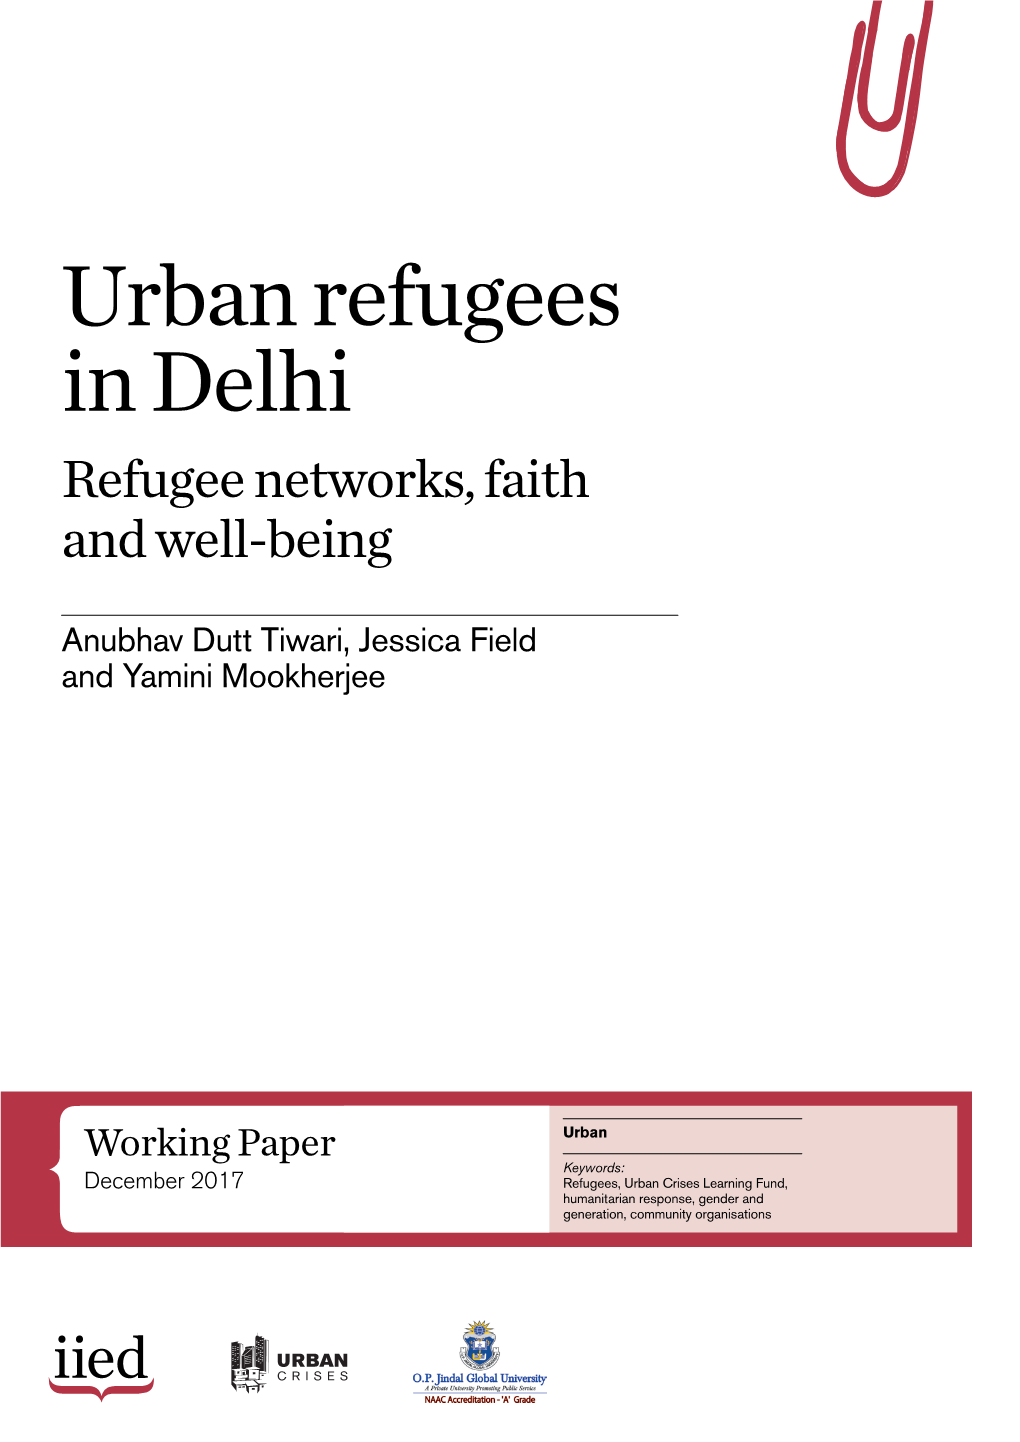 Urban Refugees in Delhi: Refugee Networks, Faith and Well-Being